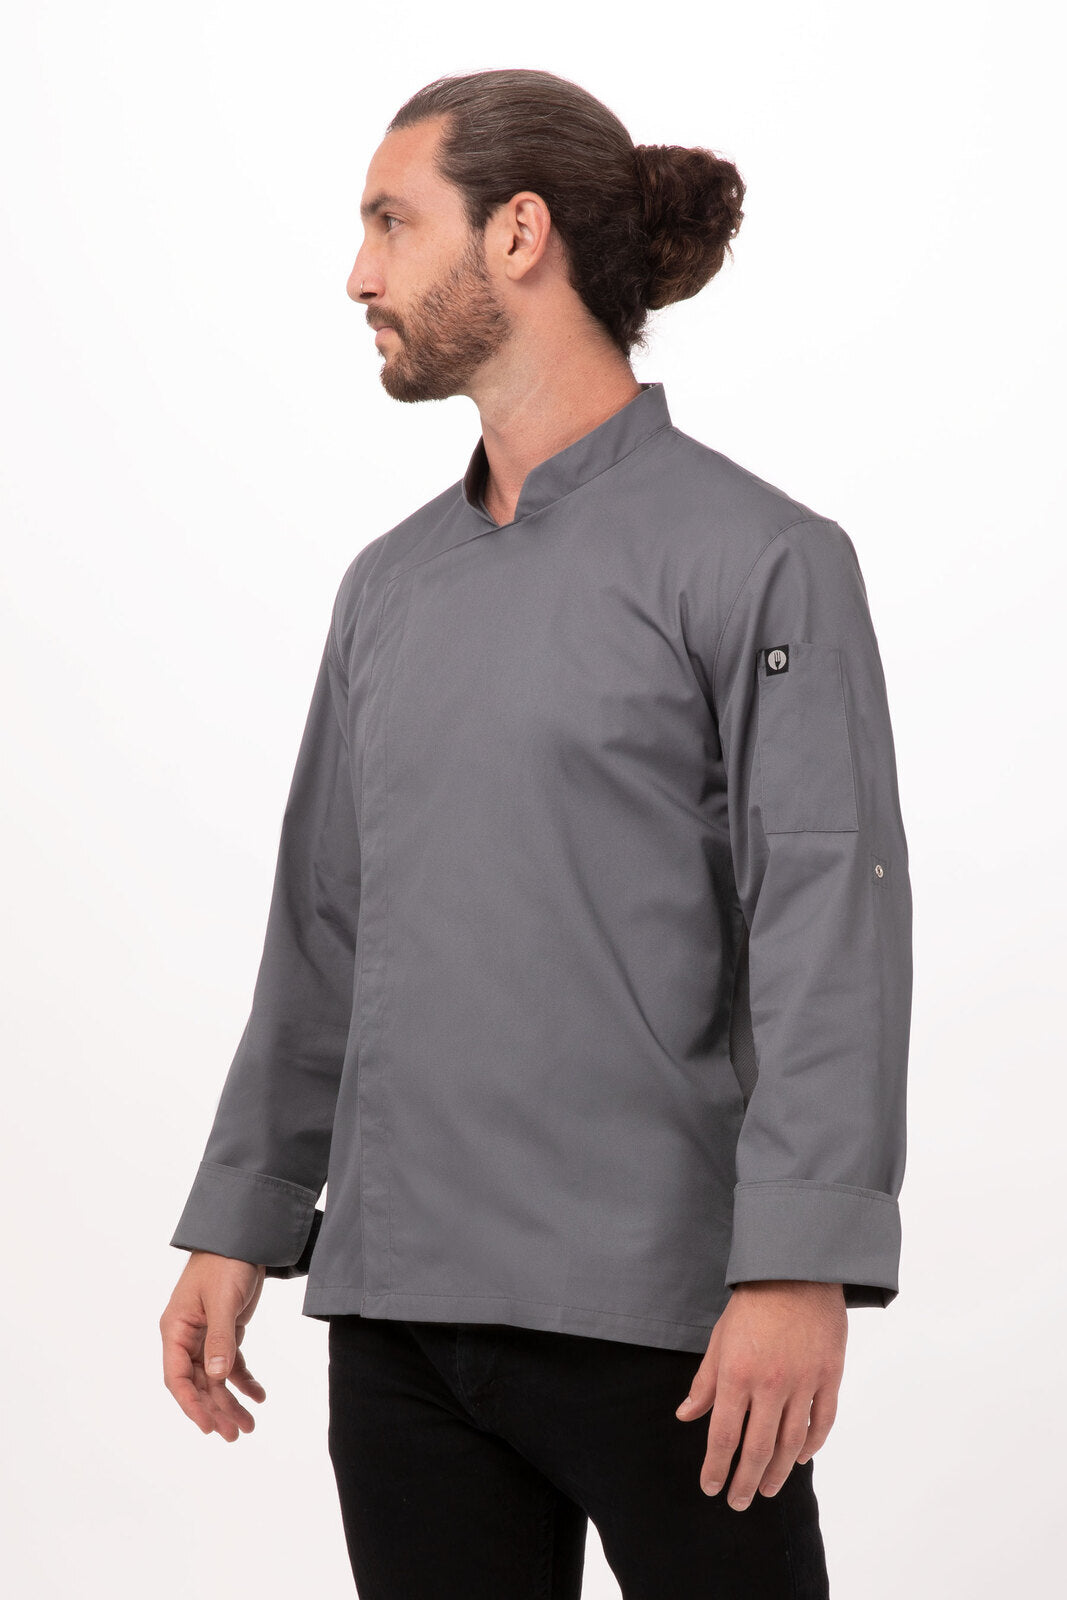 Chef Works Lansing Chef Jacket-(BCMC010)